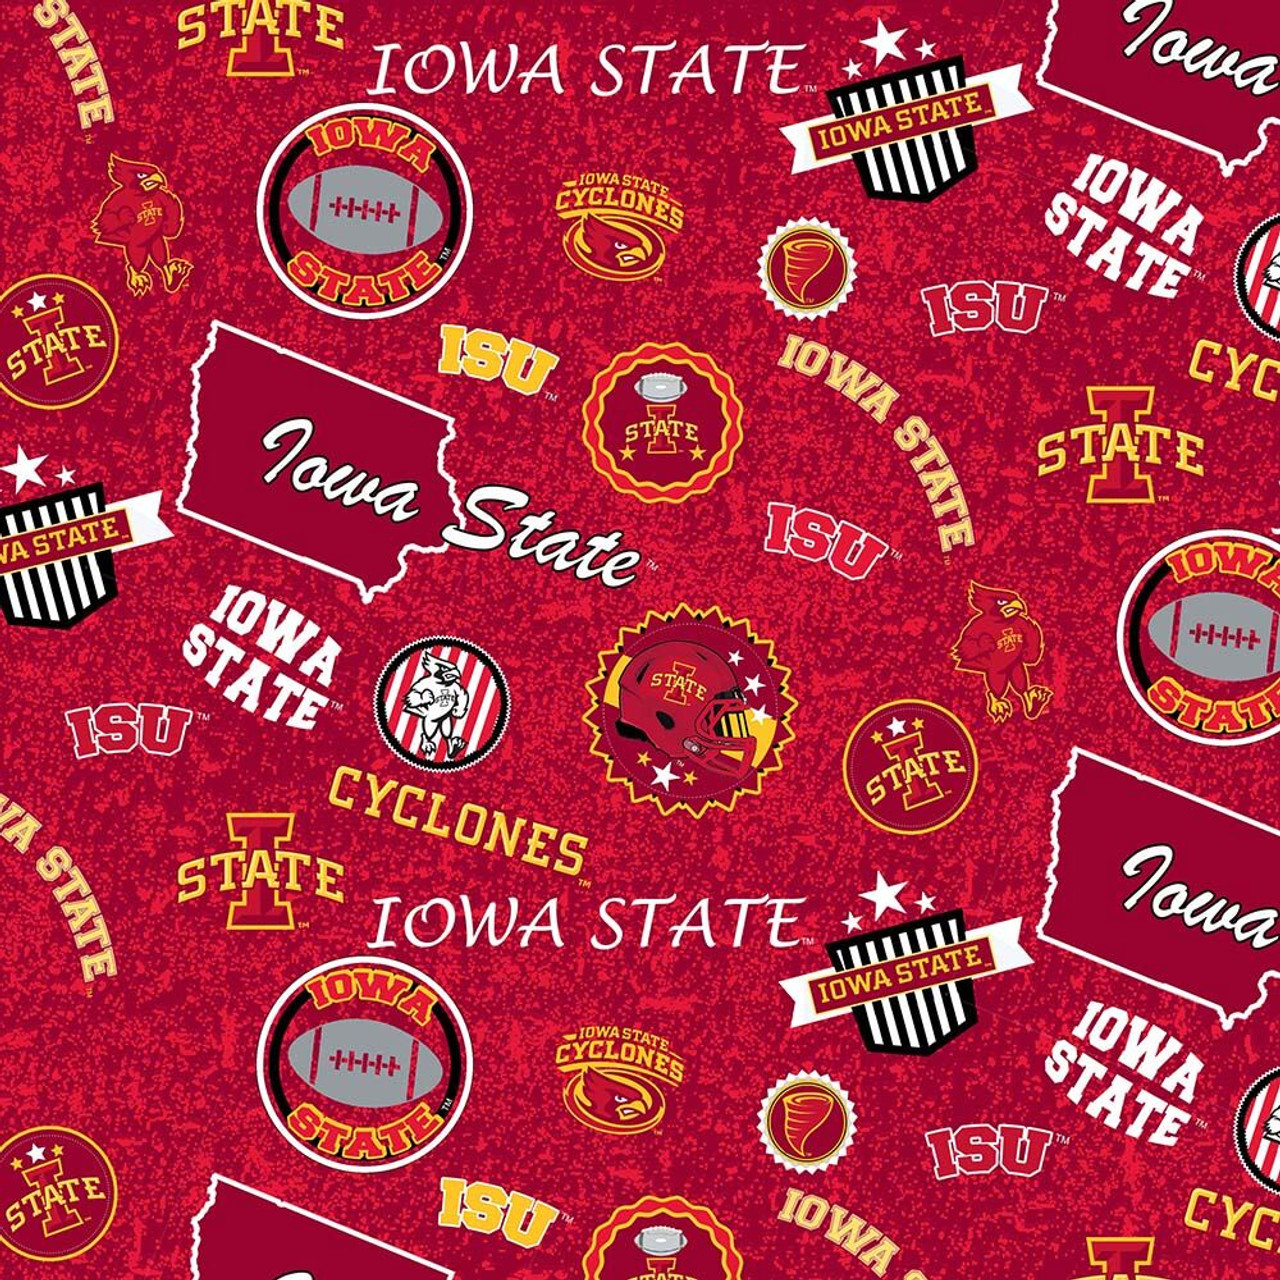 Iowa State University Cyclones Cotton Fabric with Home State Print or Matching Solid Cotton Fabrics